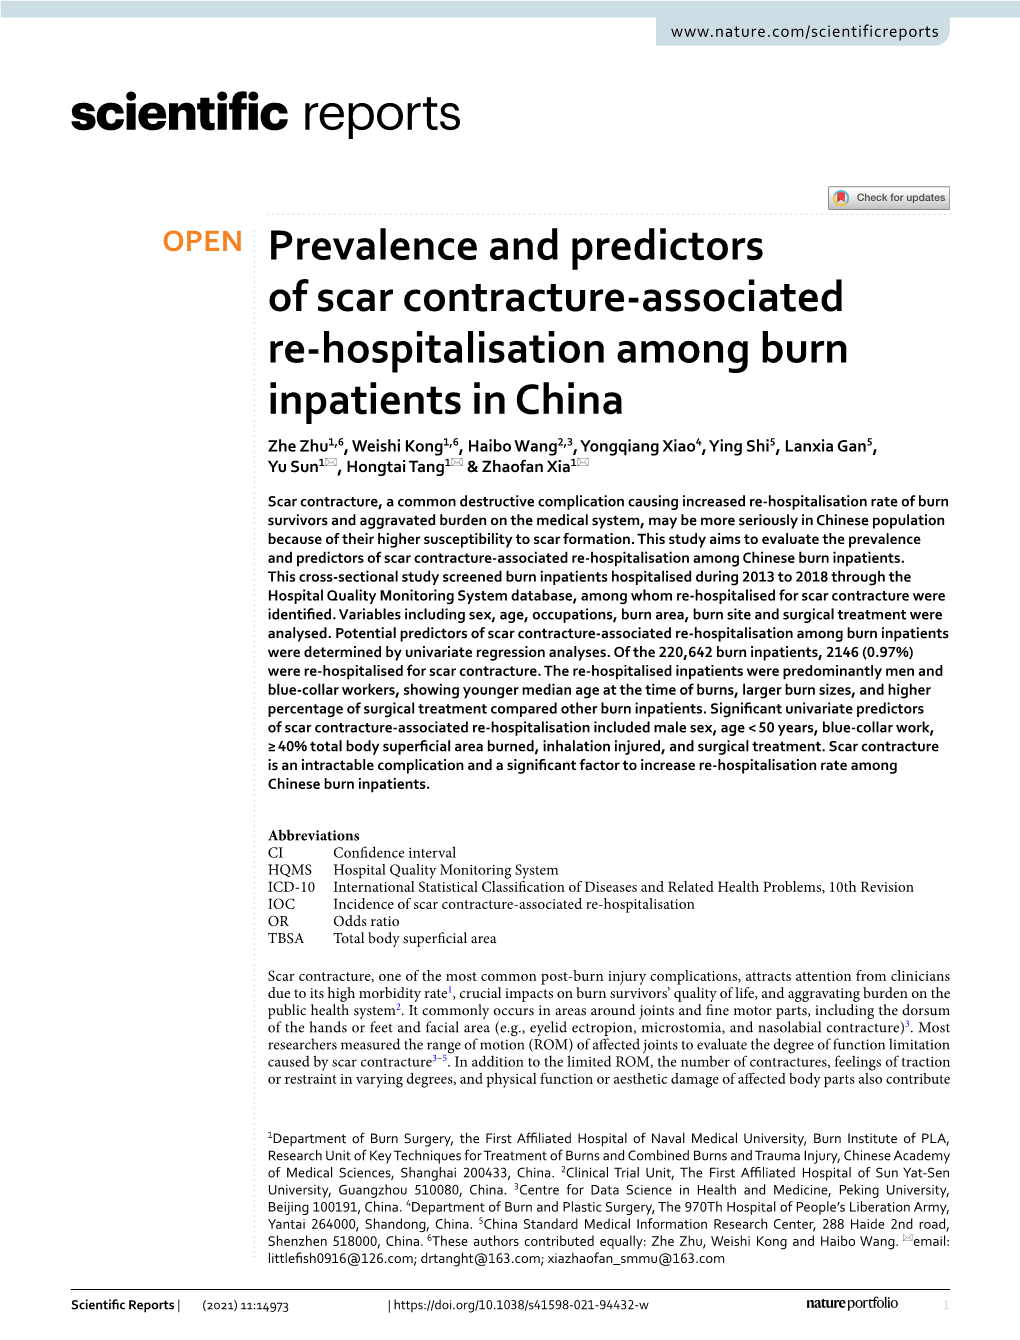 Prevalence and Predictors of Scar Contracture-Associated Re-Hospitalisation Among Chinese Burn Inpatients